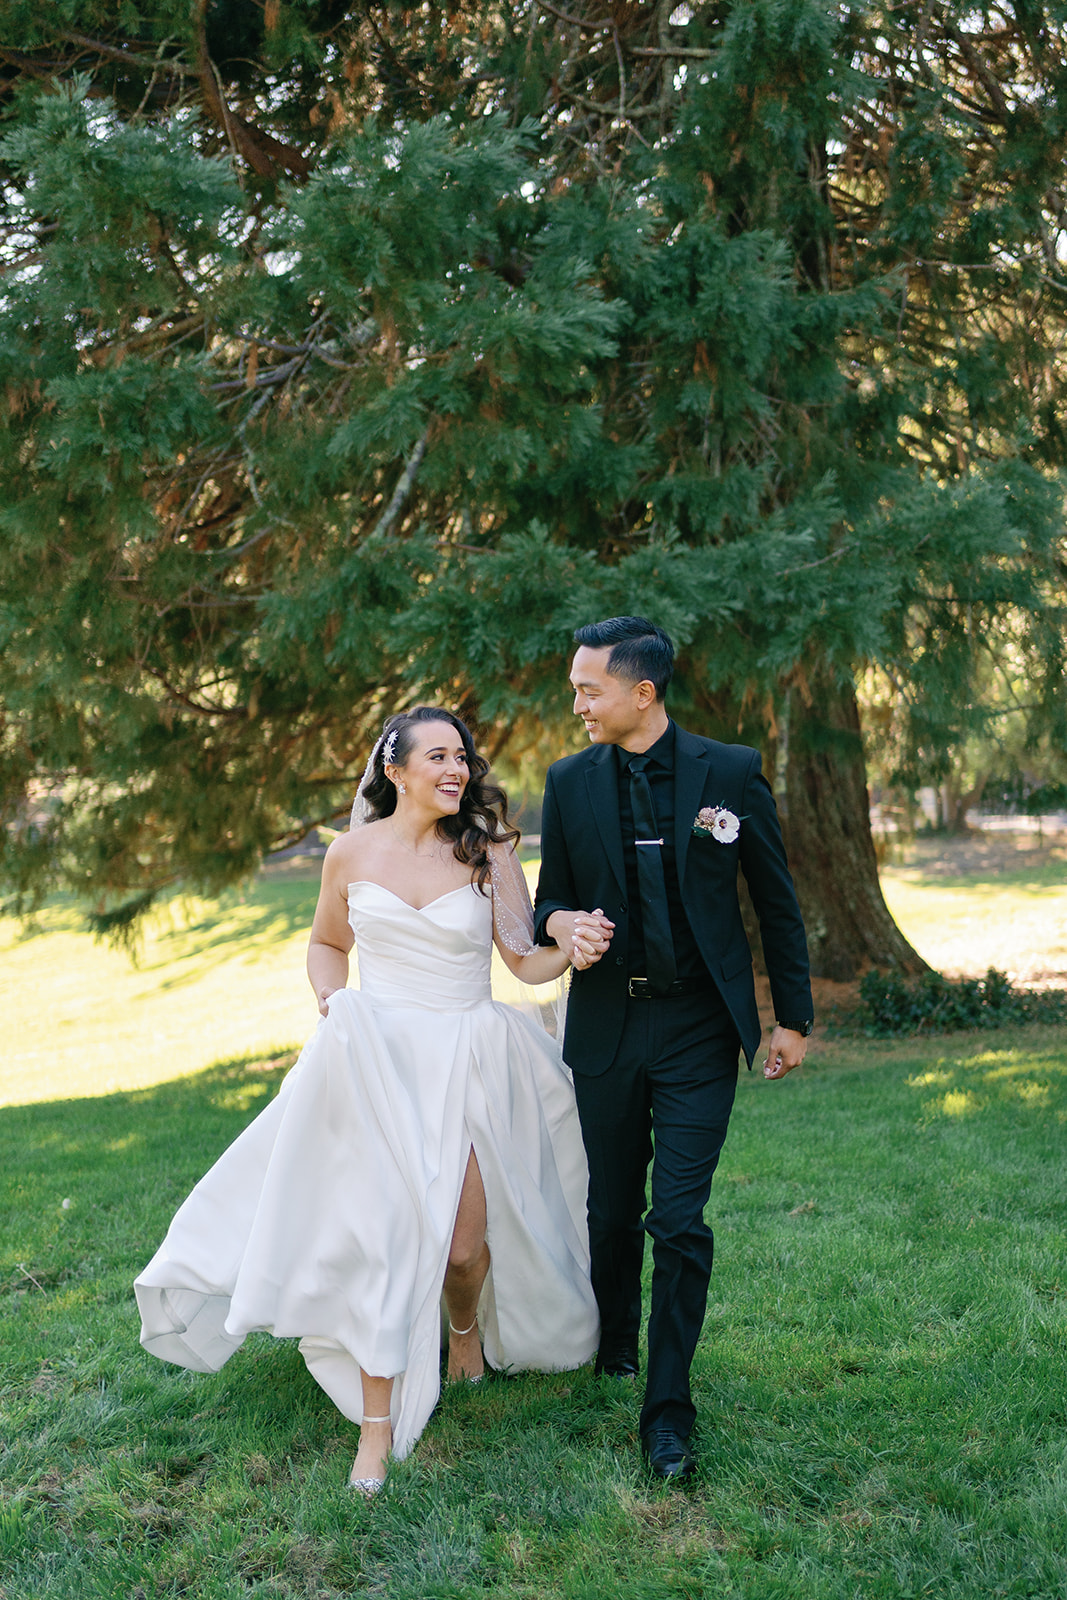 Newlyweds walk through a park under a tree holding hands and smiling at each other